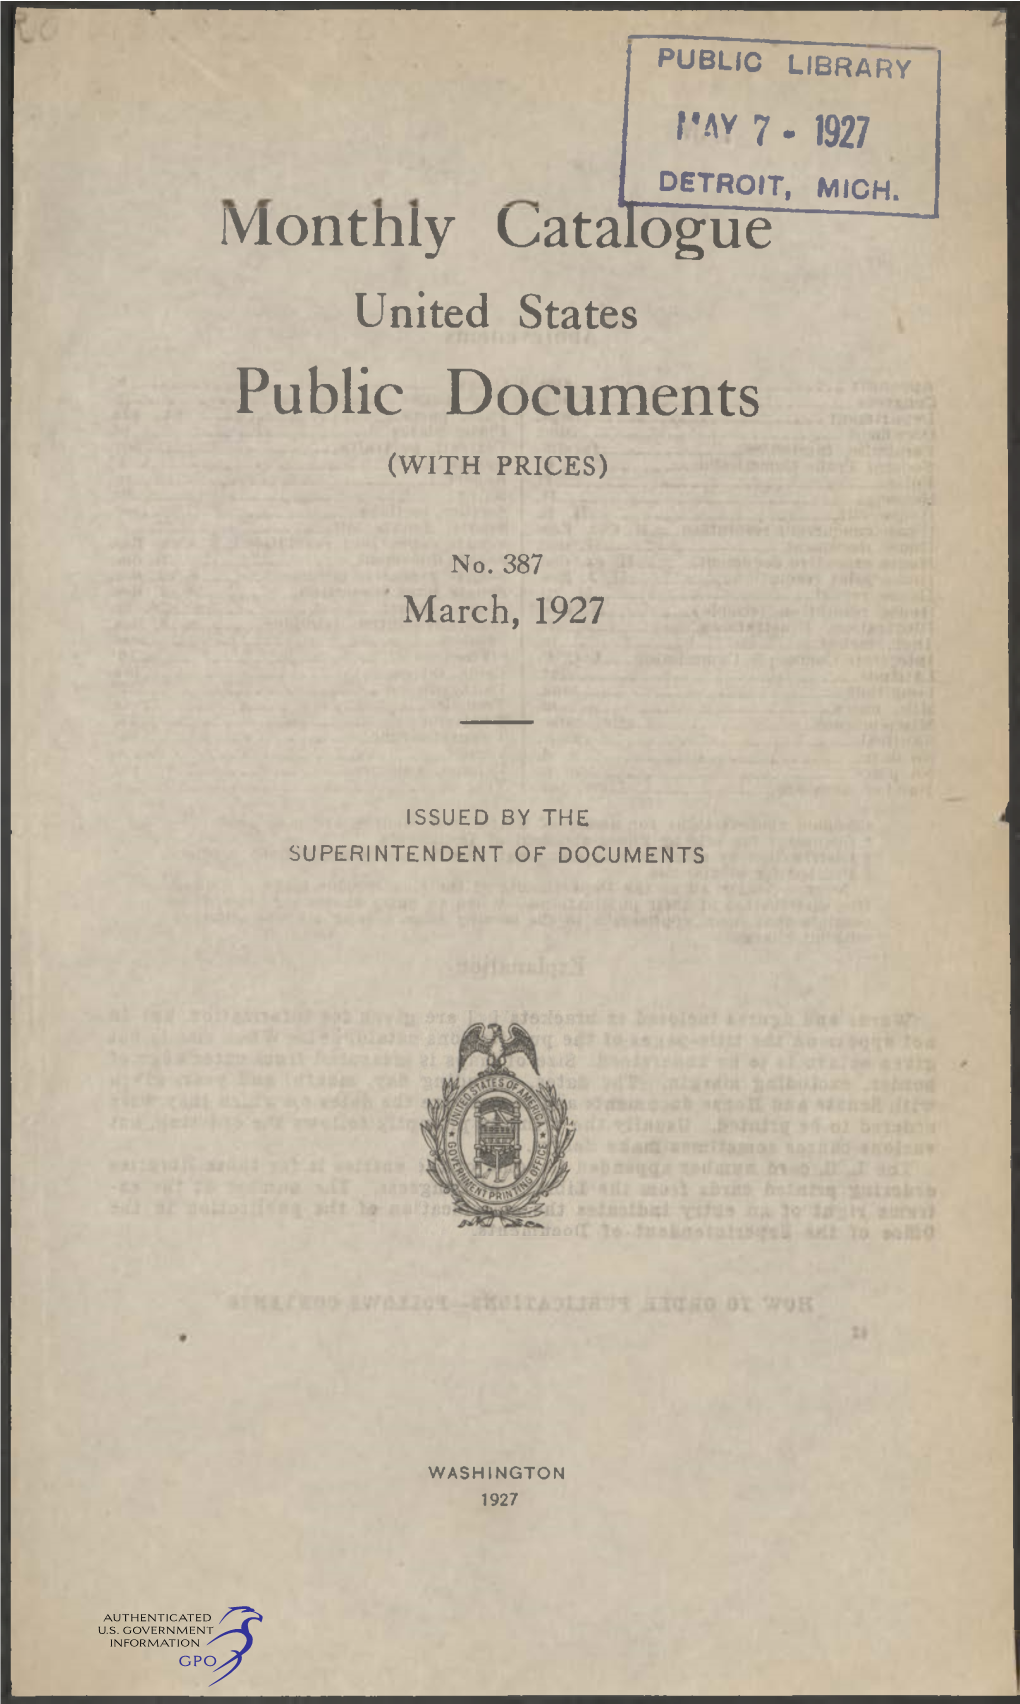 Monthly Catalogue, United States Public Documents, March 1927